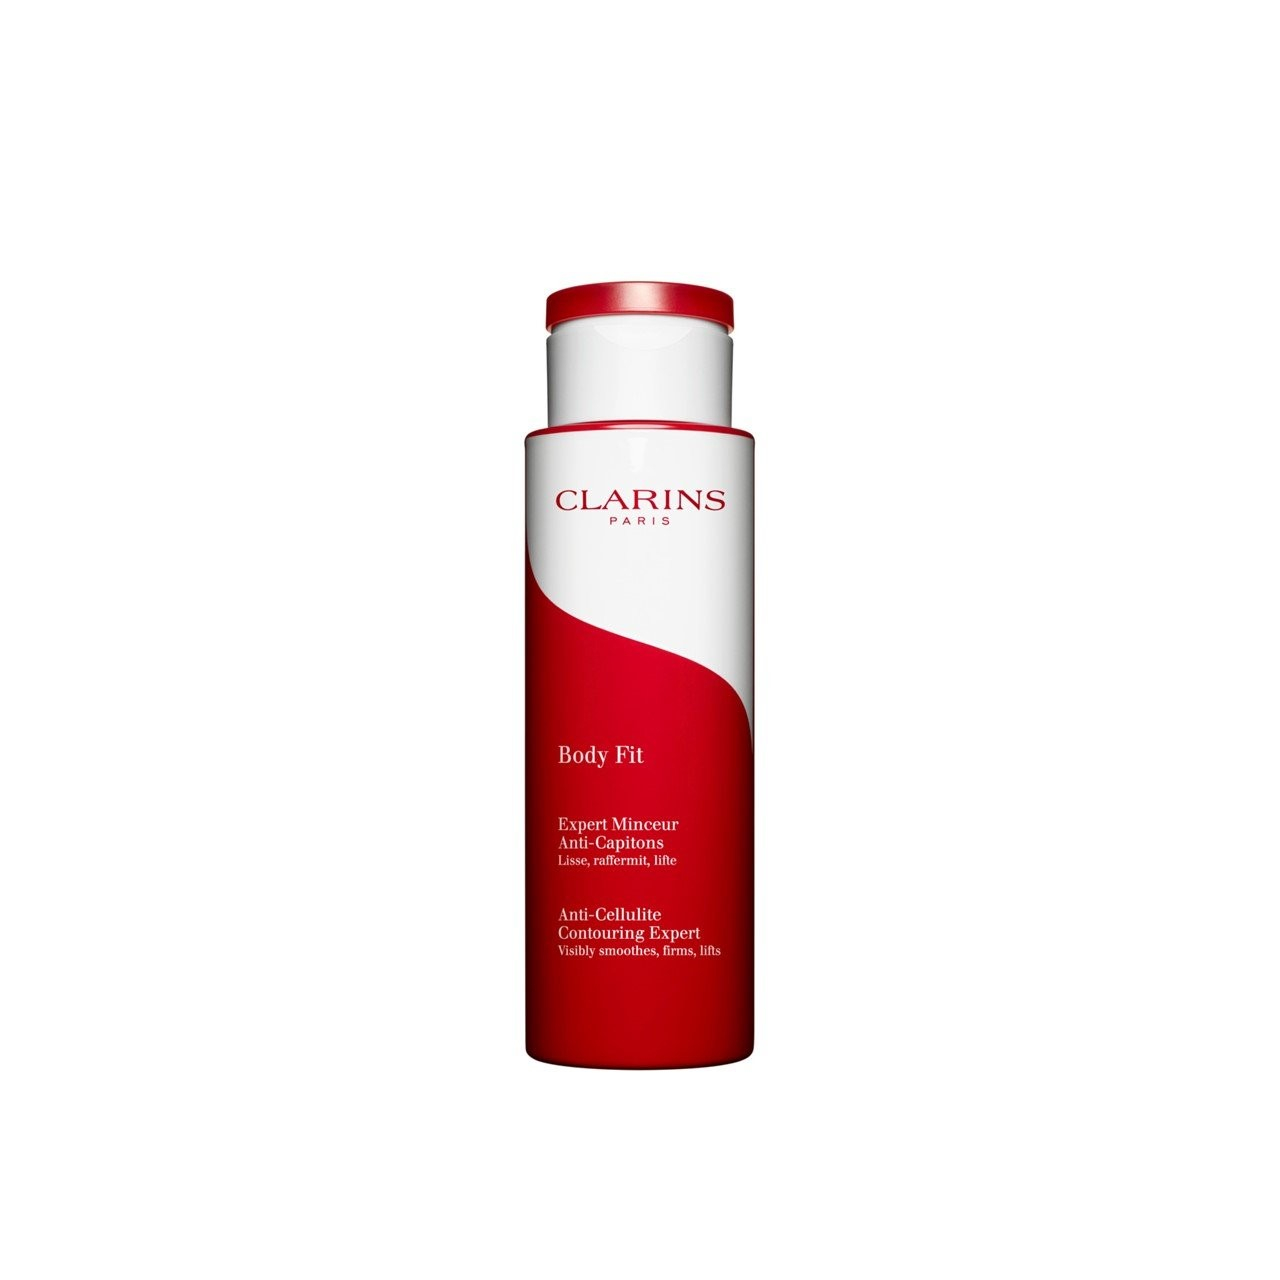 https://static.beautytocare.com/cdn-cgi/image/width=1600,height=1600,f=auto/media/catalog/product//c/l/clarins-body-fit-anti-cellulite-contouring-expert-200ml-2022.jpg